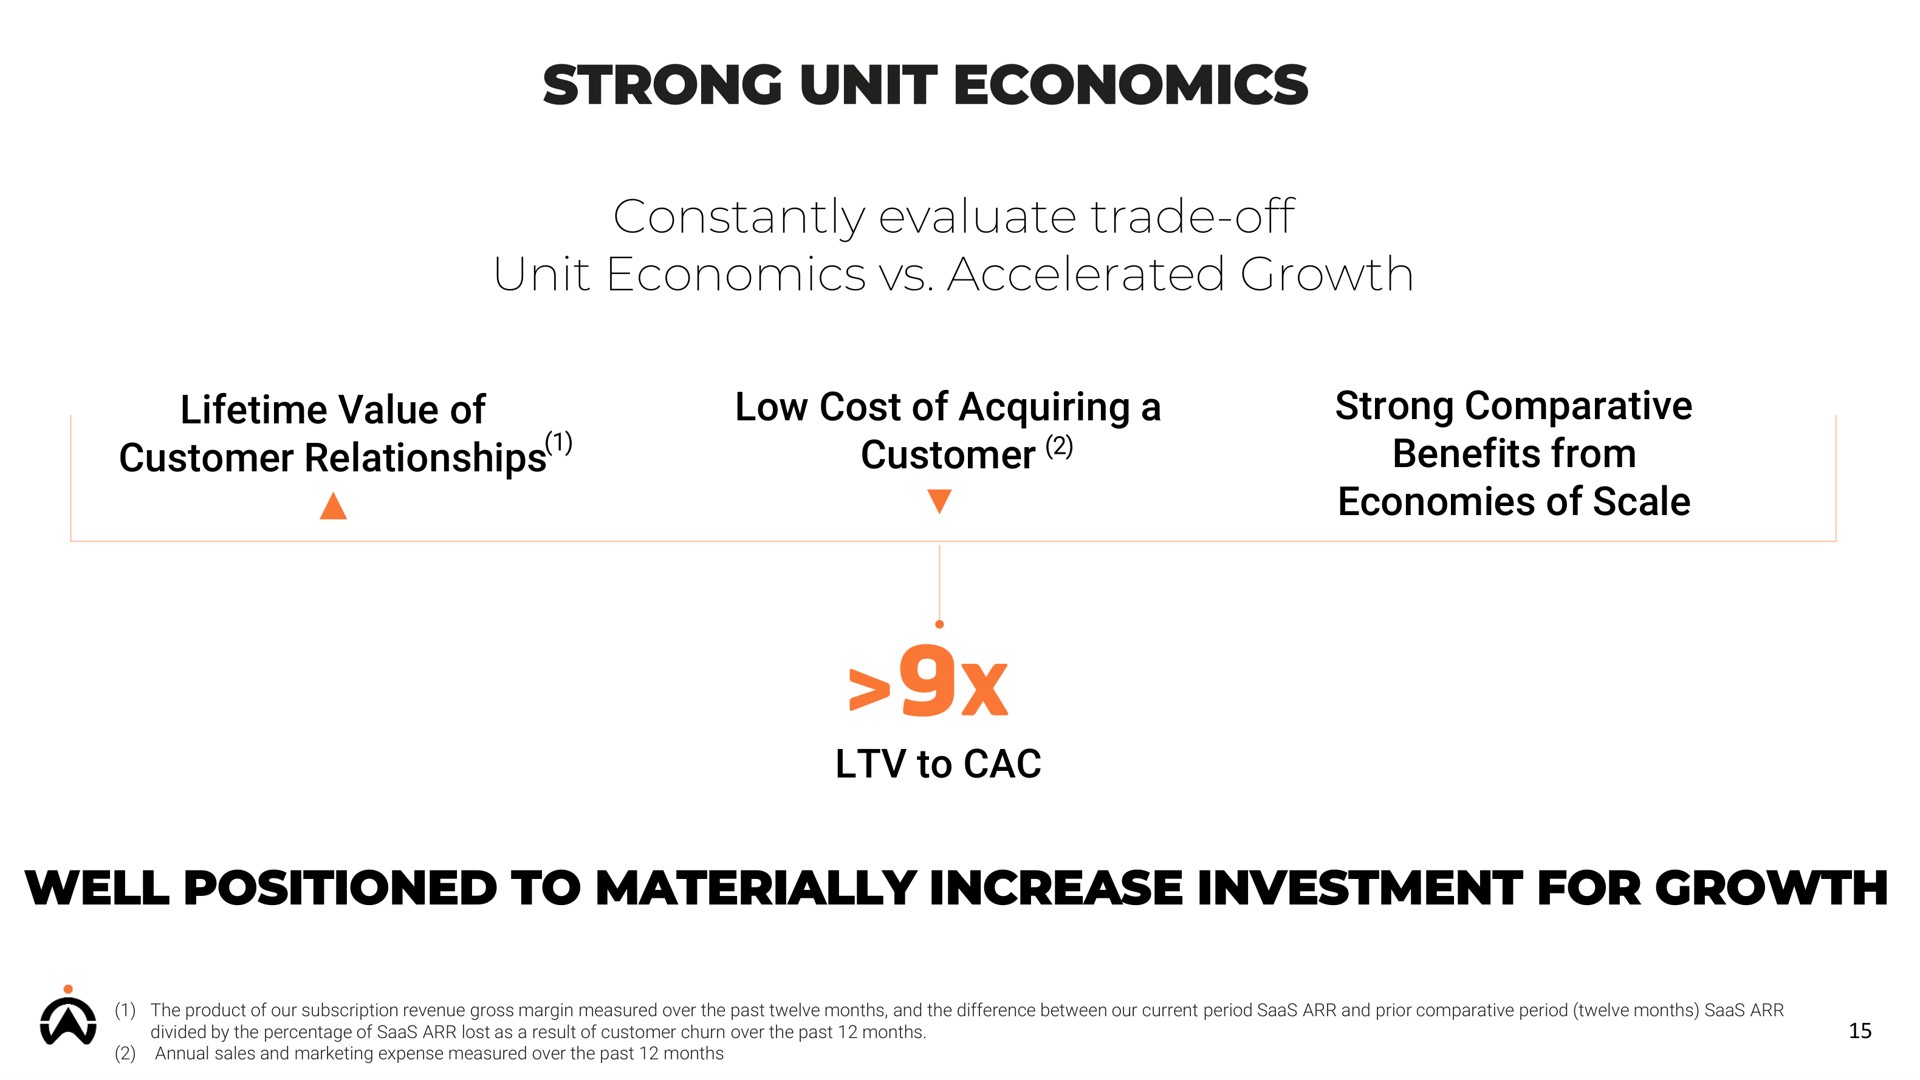 strong unit economics constantly evaluate trade off unit economics accelerated growth well positioned to materially increase investment for growth | Karooooo